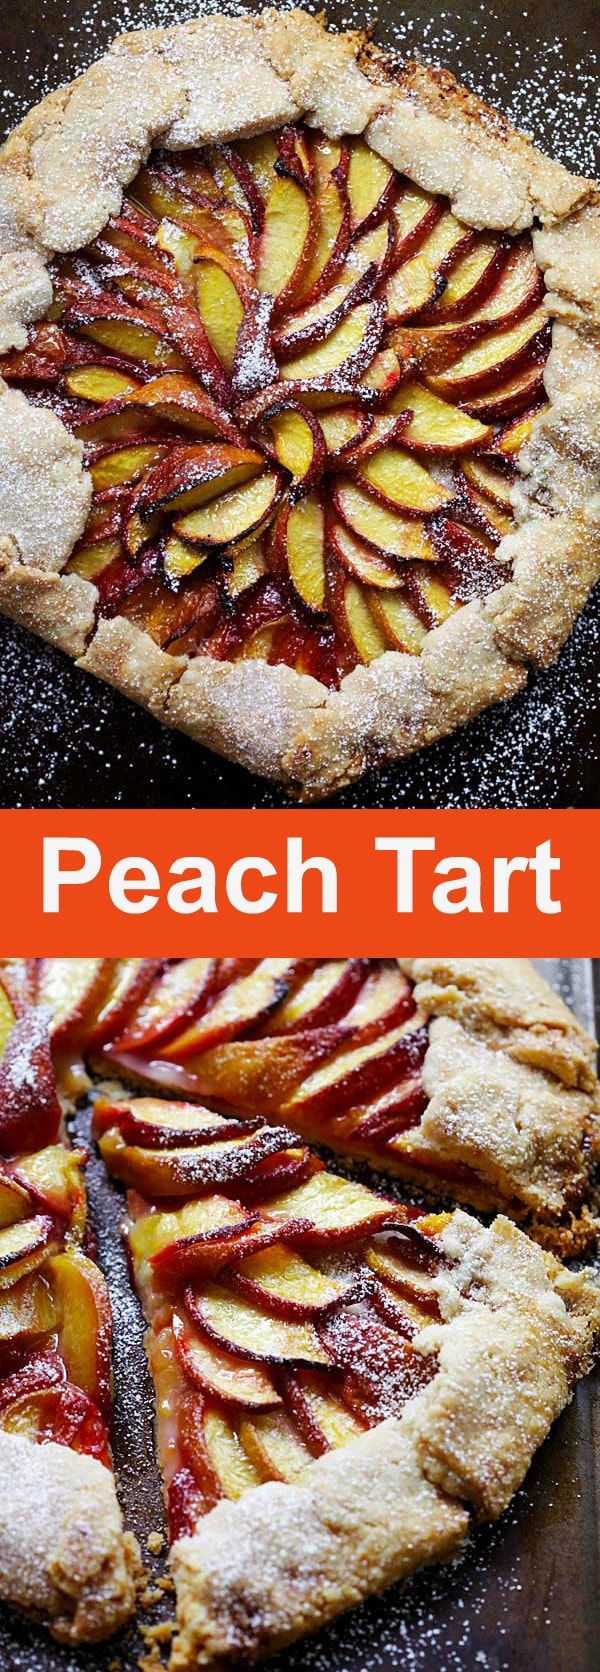 Easy Peach Tart - the best and easiest tart ever, loaded with peaches. The pie crust is flaky, buttery and delicious. This recipe is so easy and fail-proof for novice baker | rasamalaysia.com